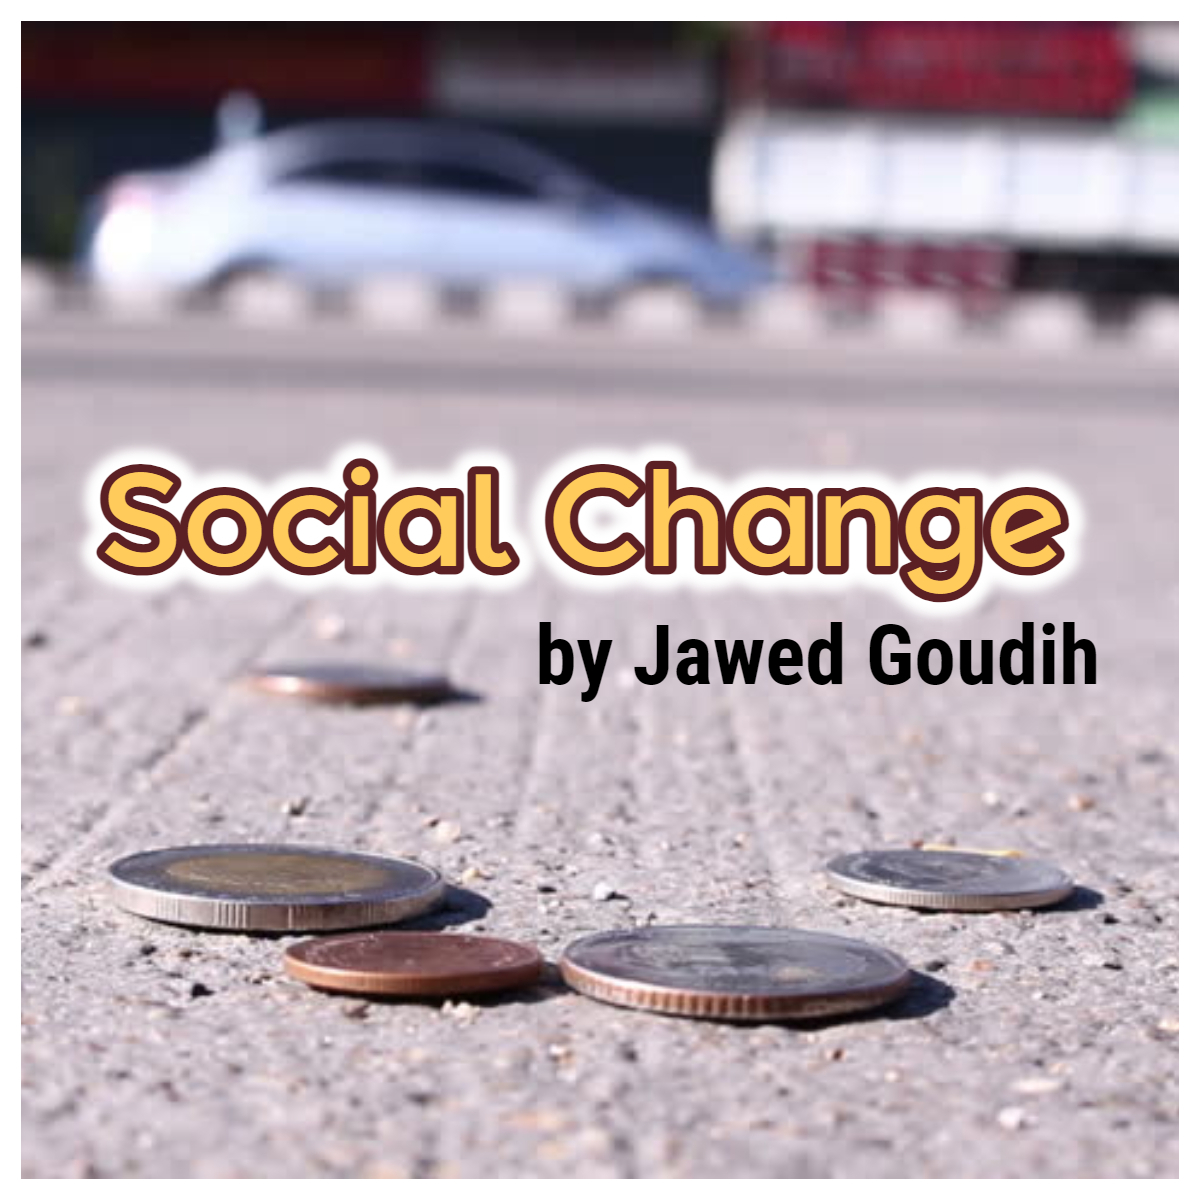 Social Change by Jawed Goudih (MP4 Video Download)